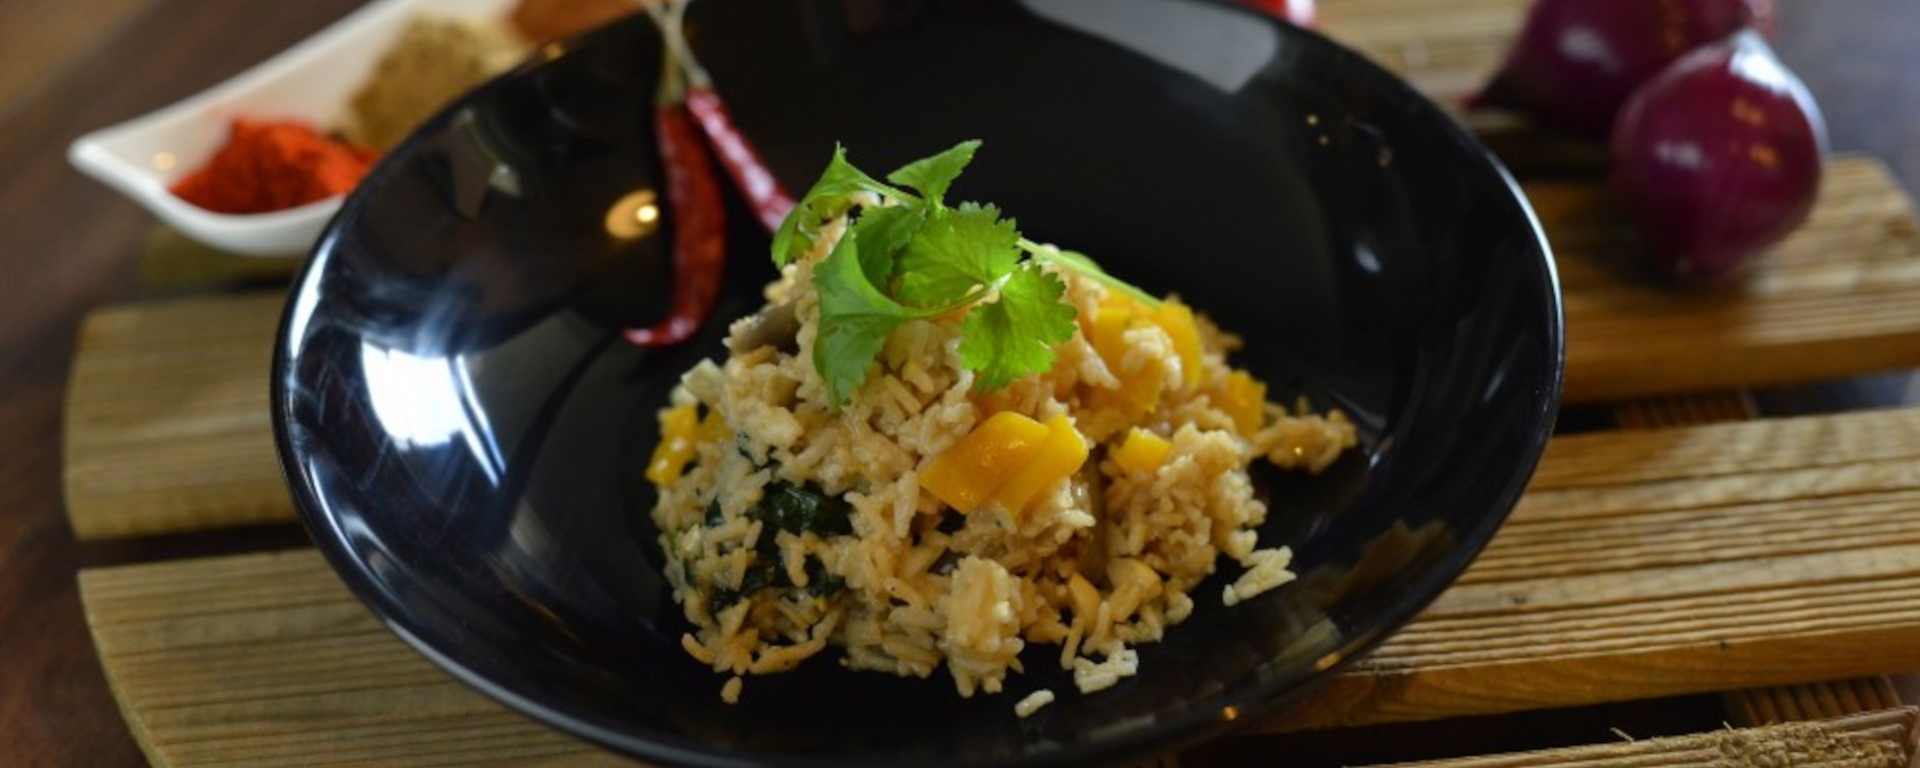 LuvMyRecipe.com - Mixed Curry Flavoured Rice with Coconut Milk, Spinach, Chicken Featured